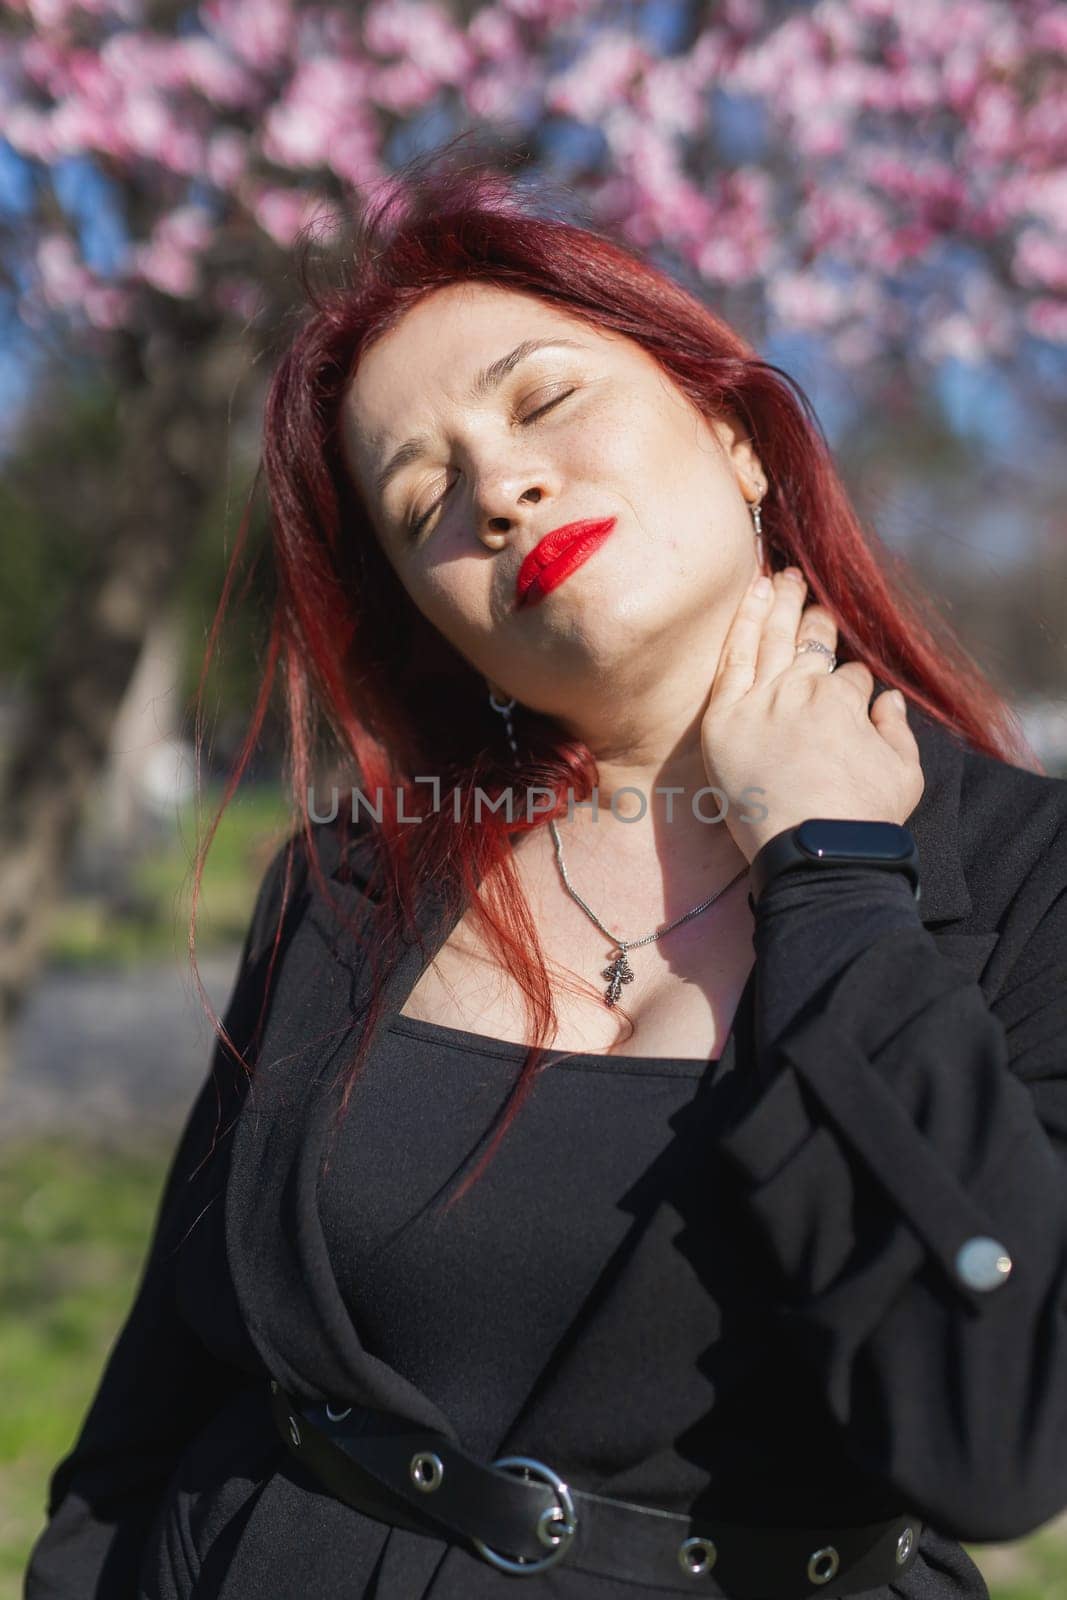 Fashion outdoor photo of beautiful woman with red curly hair in elegant suit posing in spring flowering park with blooming cherry tree. Copy space and empty place for advertising text.